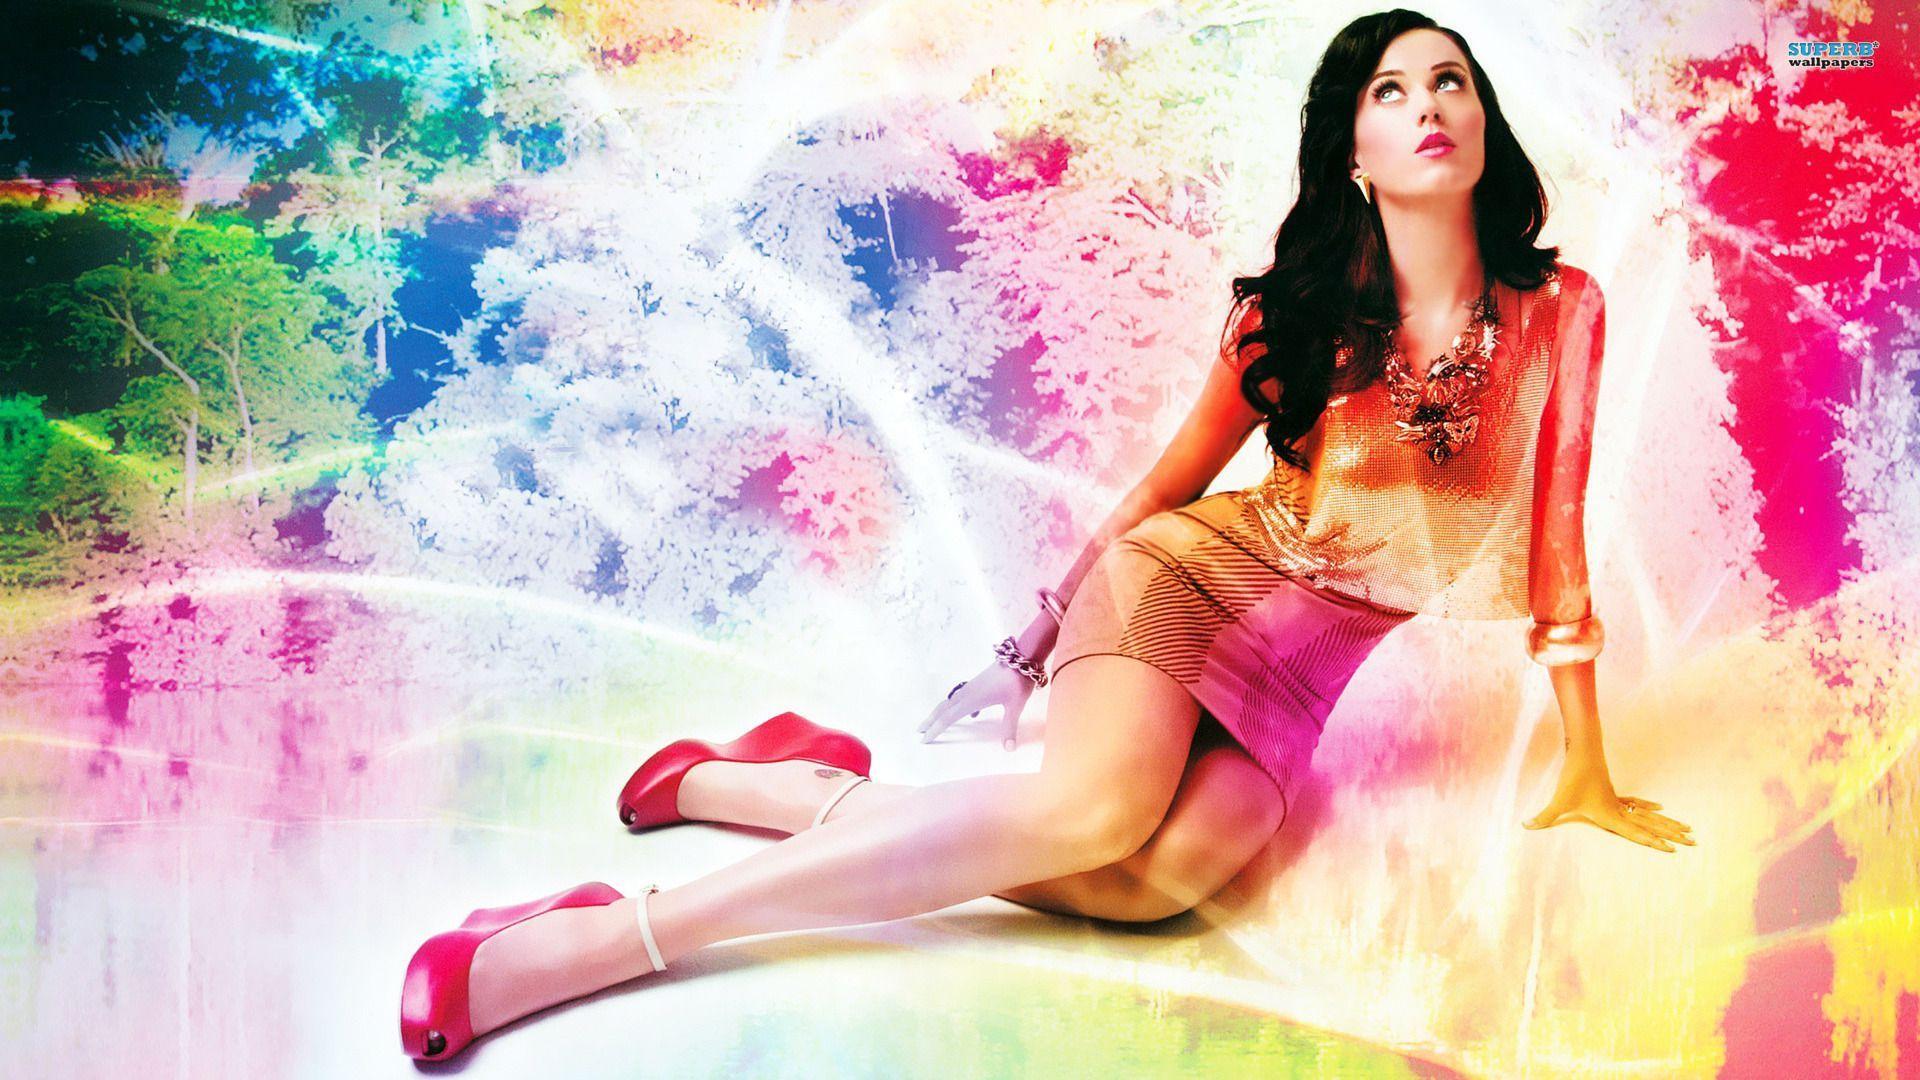 Picture Katy Perry Wallpaper 1080p, Image